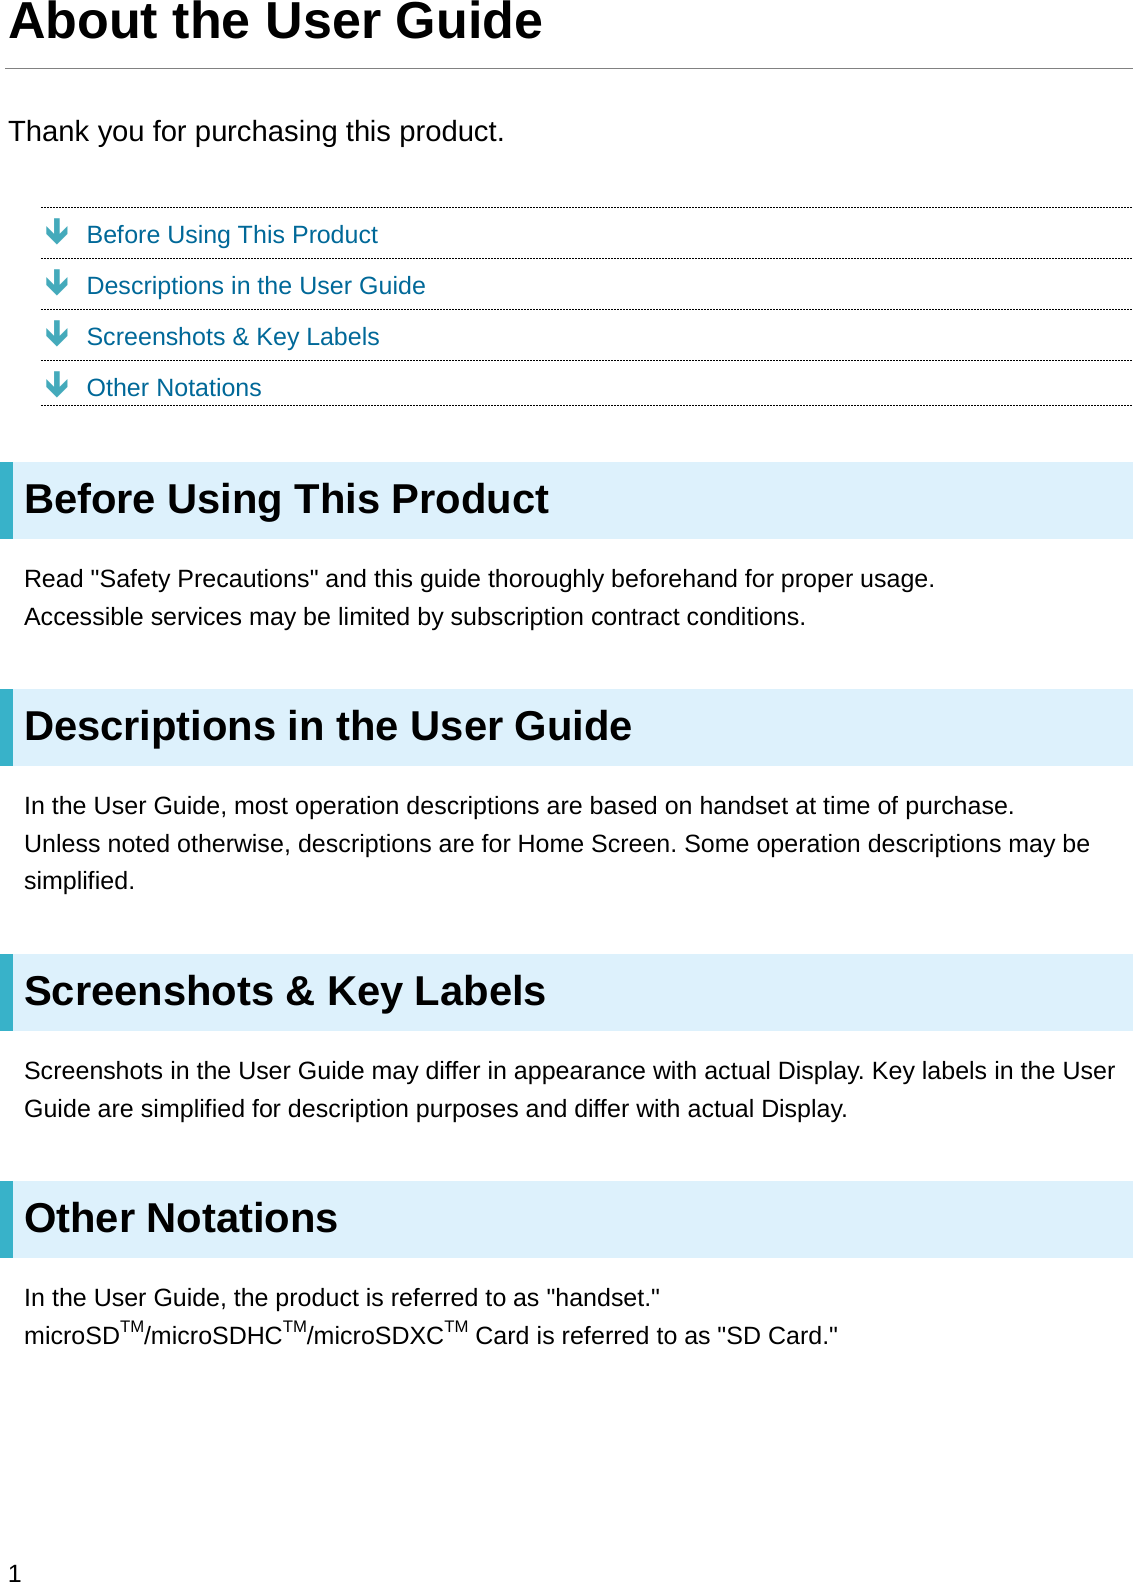 About the User GuideThank you for purchasing this product.ÐBefore Using This ProductÐDescriptions in the User GuideÐScreenshots &amp; Key LabelsÐOther NotationsBefore Using This ProductRead &quot;Safety Precautions&quot; and this guide thoroughly beforehand for proper usage.Accessible services may be limited by subscription contract conditions.Descriptions in the User GuideIn the User Guide, most operation descriptions are based on handset at time of purchase.Unless noted otherwise, descriptions are for Home Screen. Some operation descriptions may be simplified.Screenshots &amp; Key LabelsScreenshots in the User Guide may differ in appearance with actual Display. Key labels in the User Guide are simplified for description purposes and differ with actual Display.Other NotationsIn the User Guide, the product is referred to as &quot;handset.&quot;microSDTM/microSDHCTM/microSDXCTM Card is referred to as &quot;SD Card.&quot;1